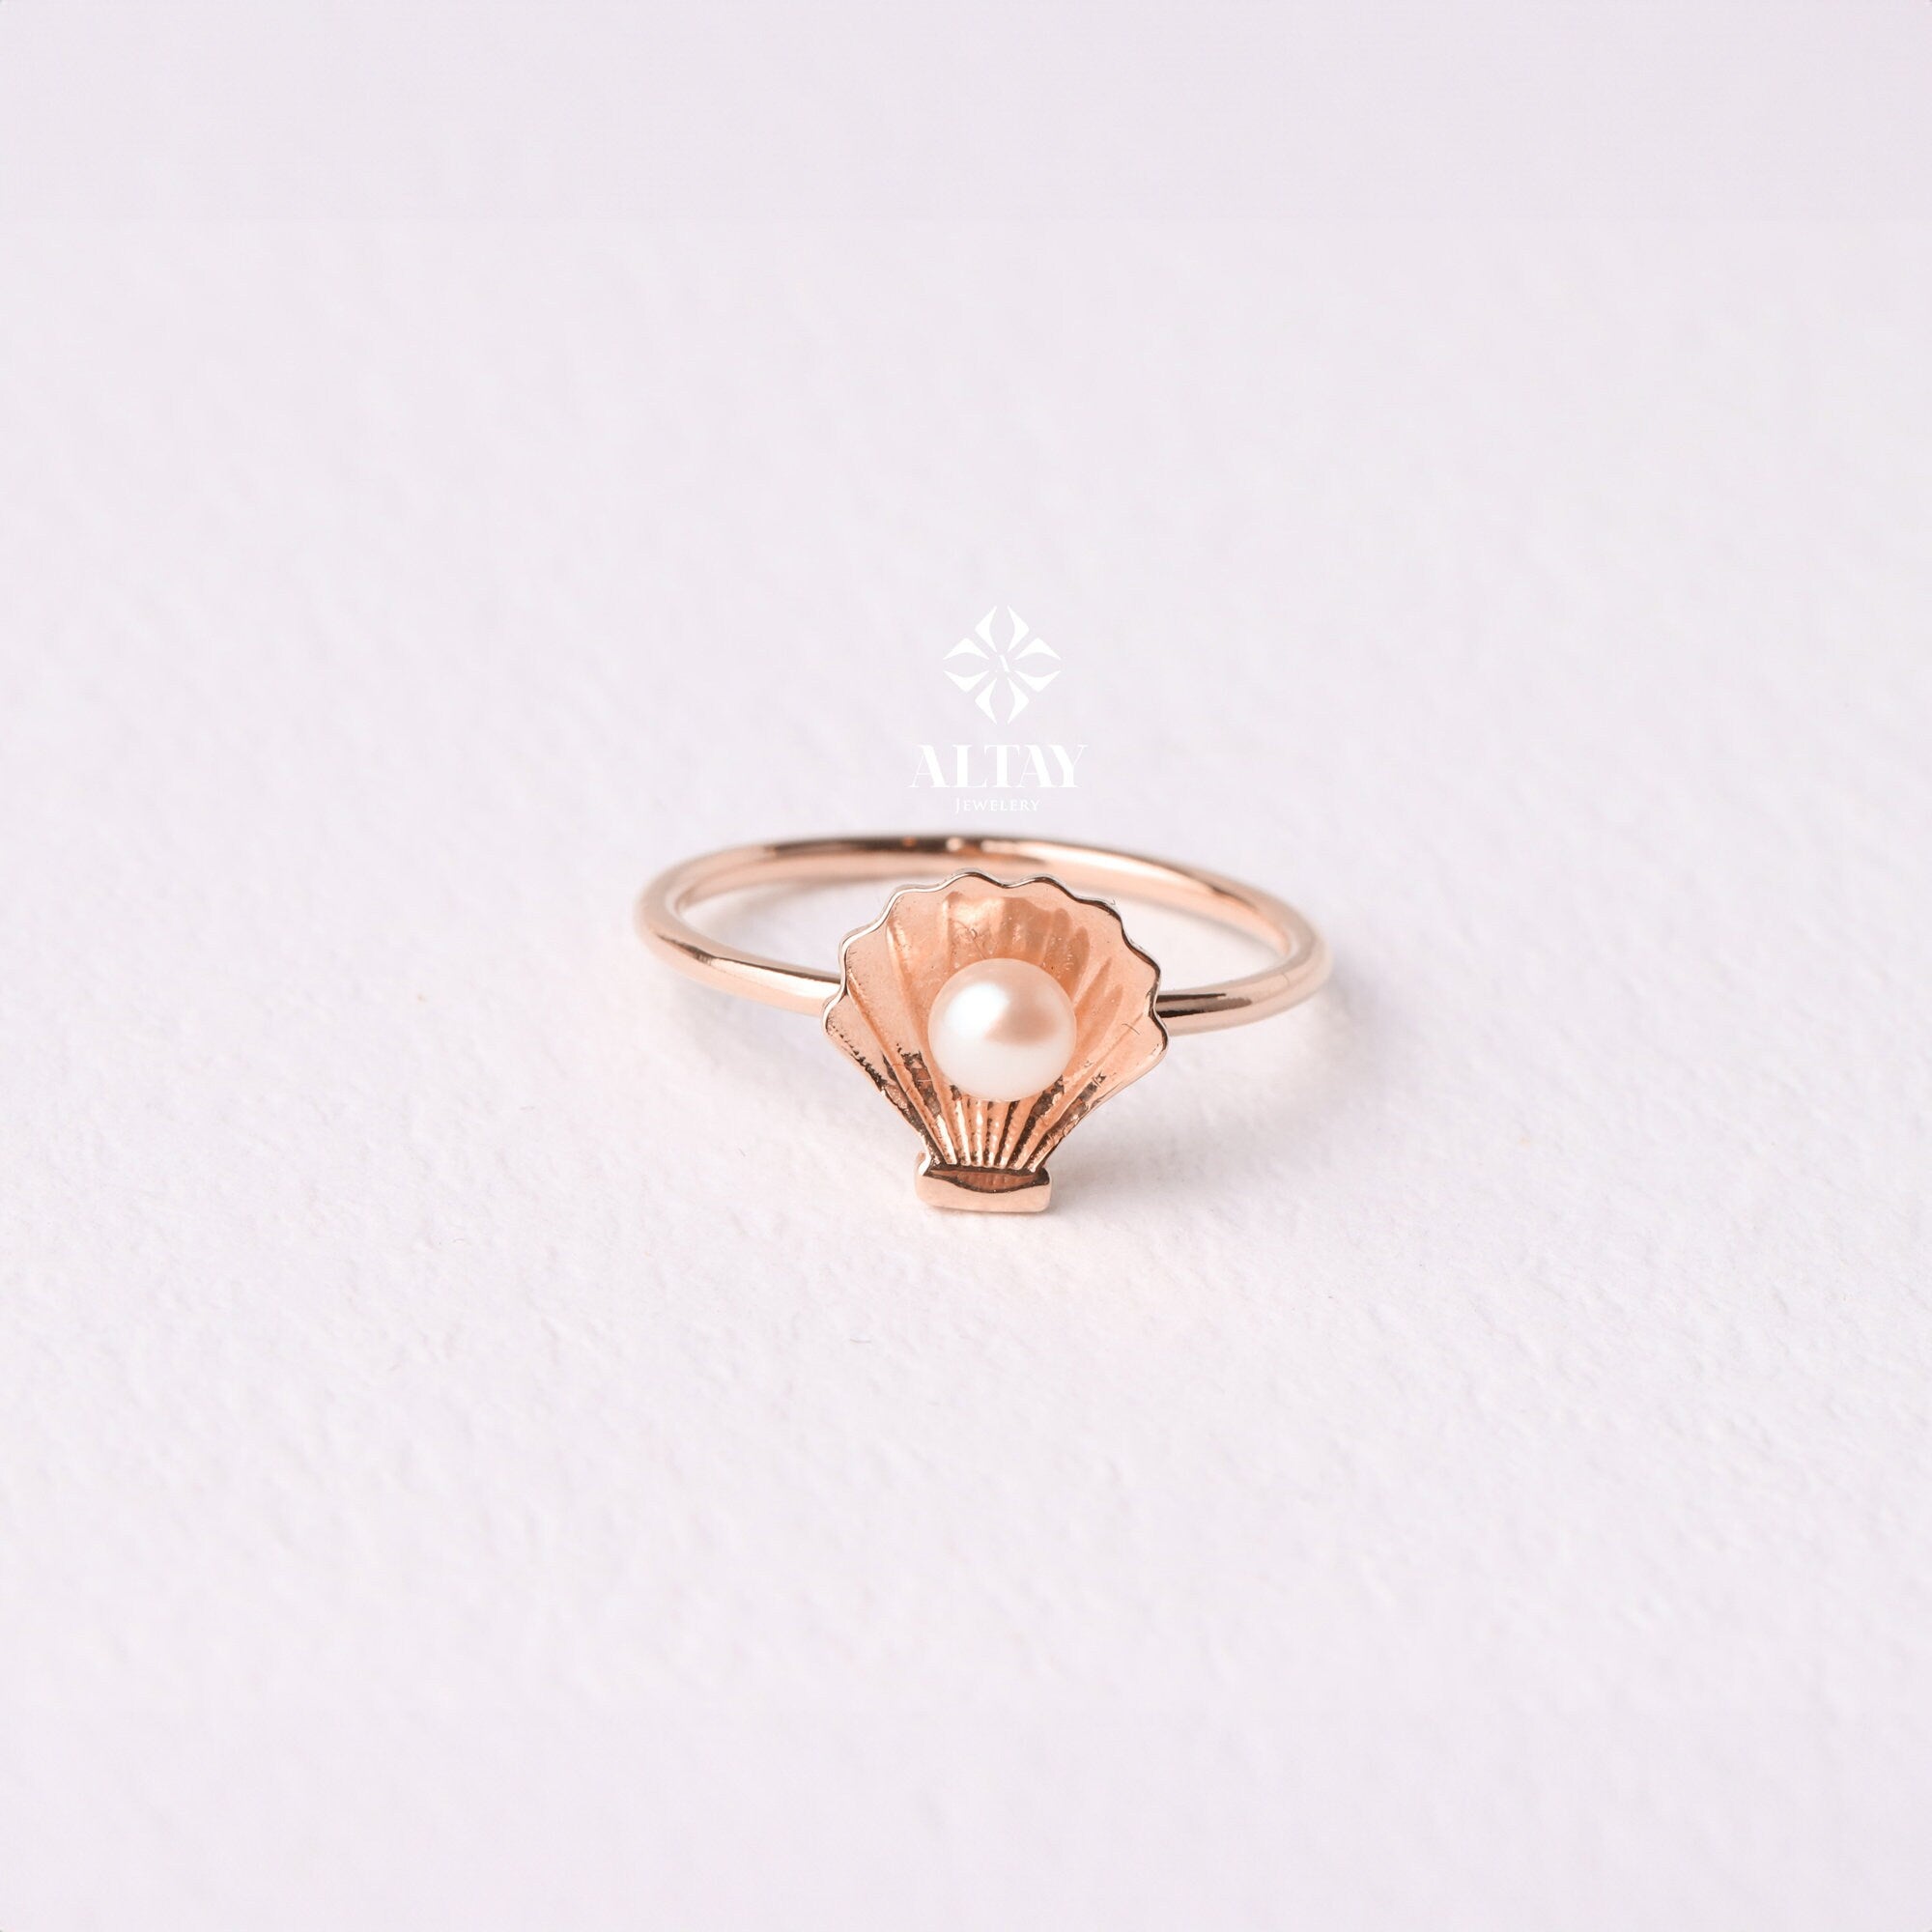 14K Gold Oyster Shell Ring, Seashell Pearl Ring, Nautical Symbol Ring, Best Friends Gift, Good Luck ring, Valentines Unique Gift for Her